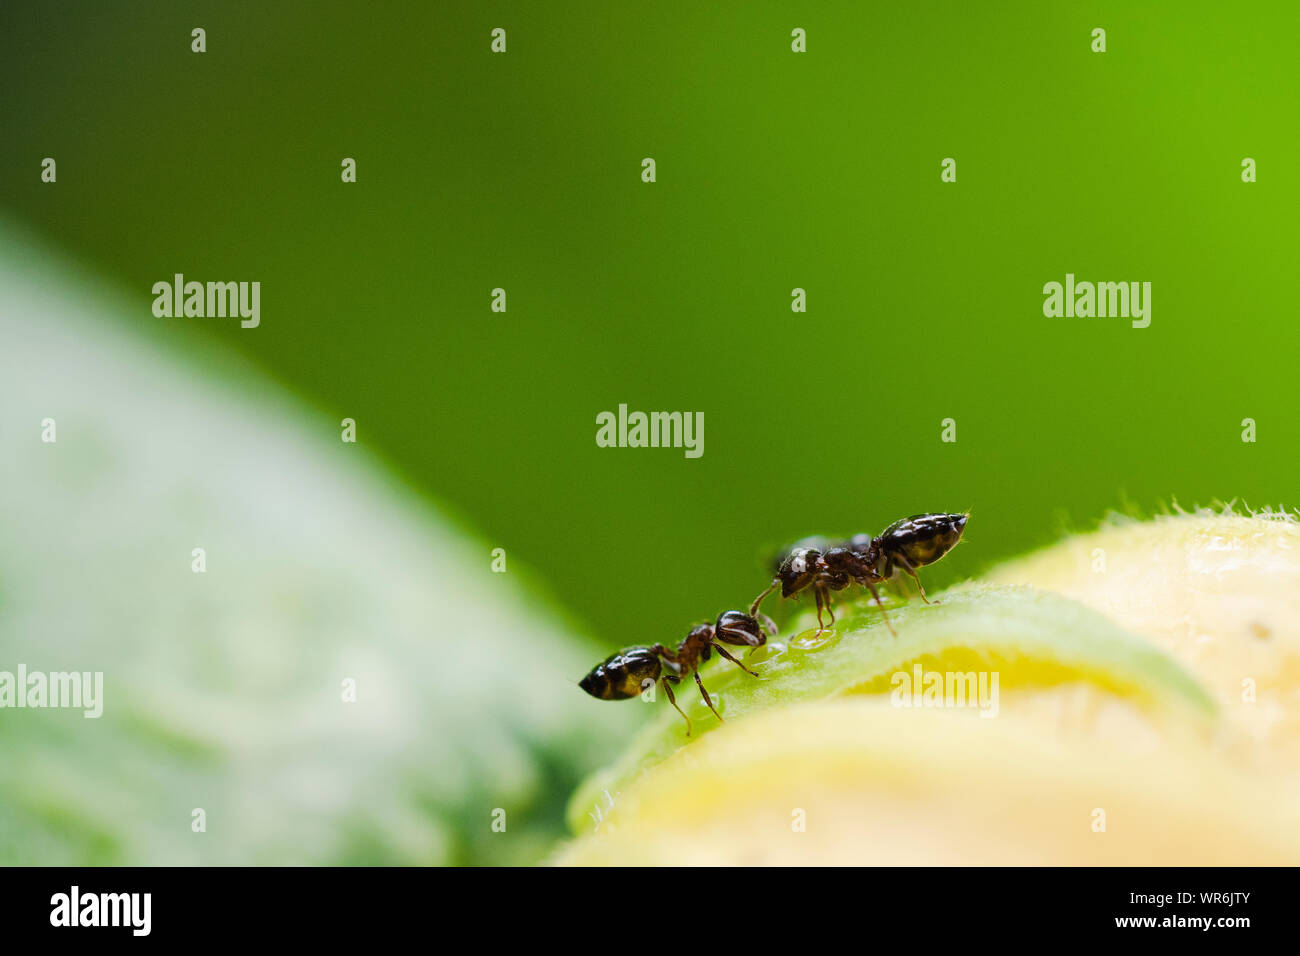 Close up of ants looking for food with green background Stock Photo